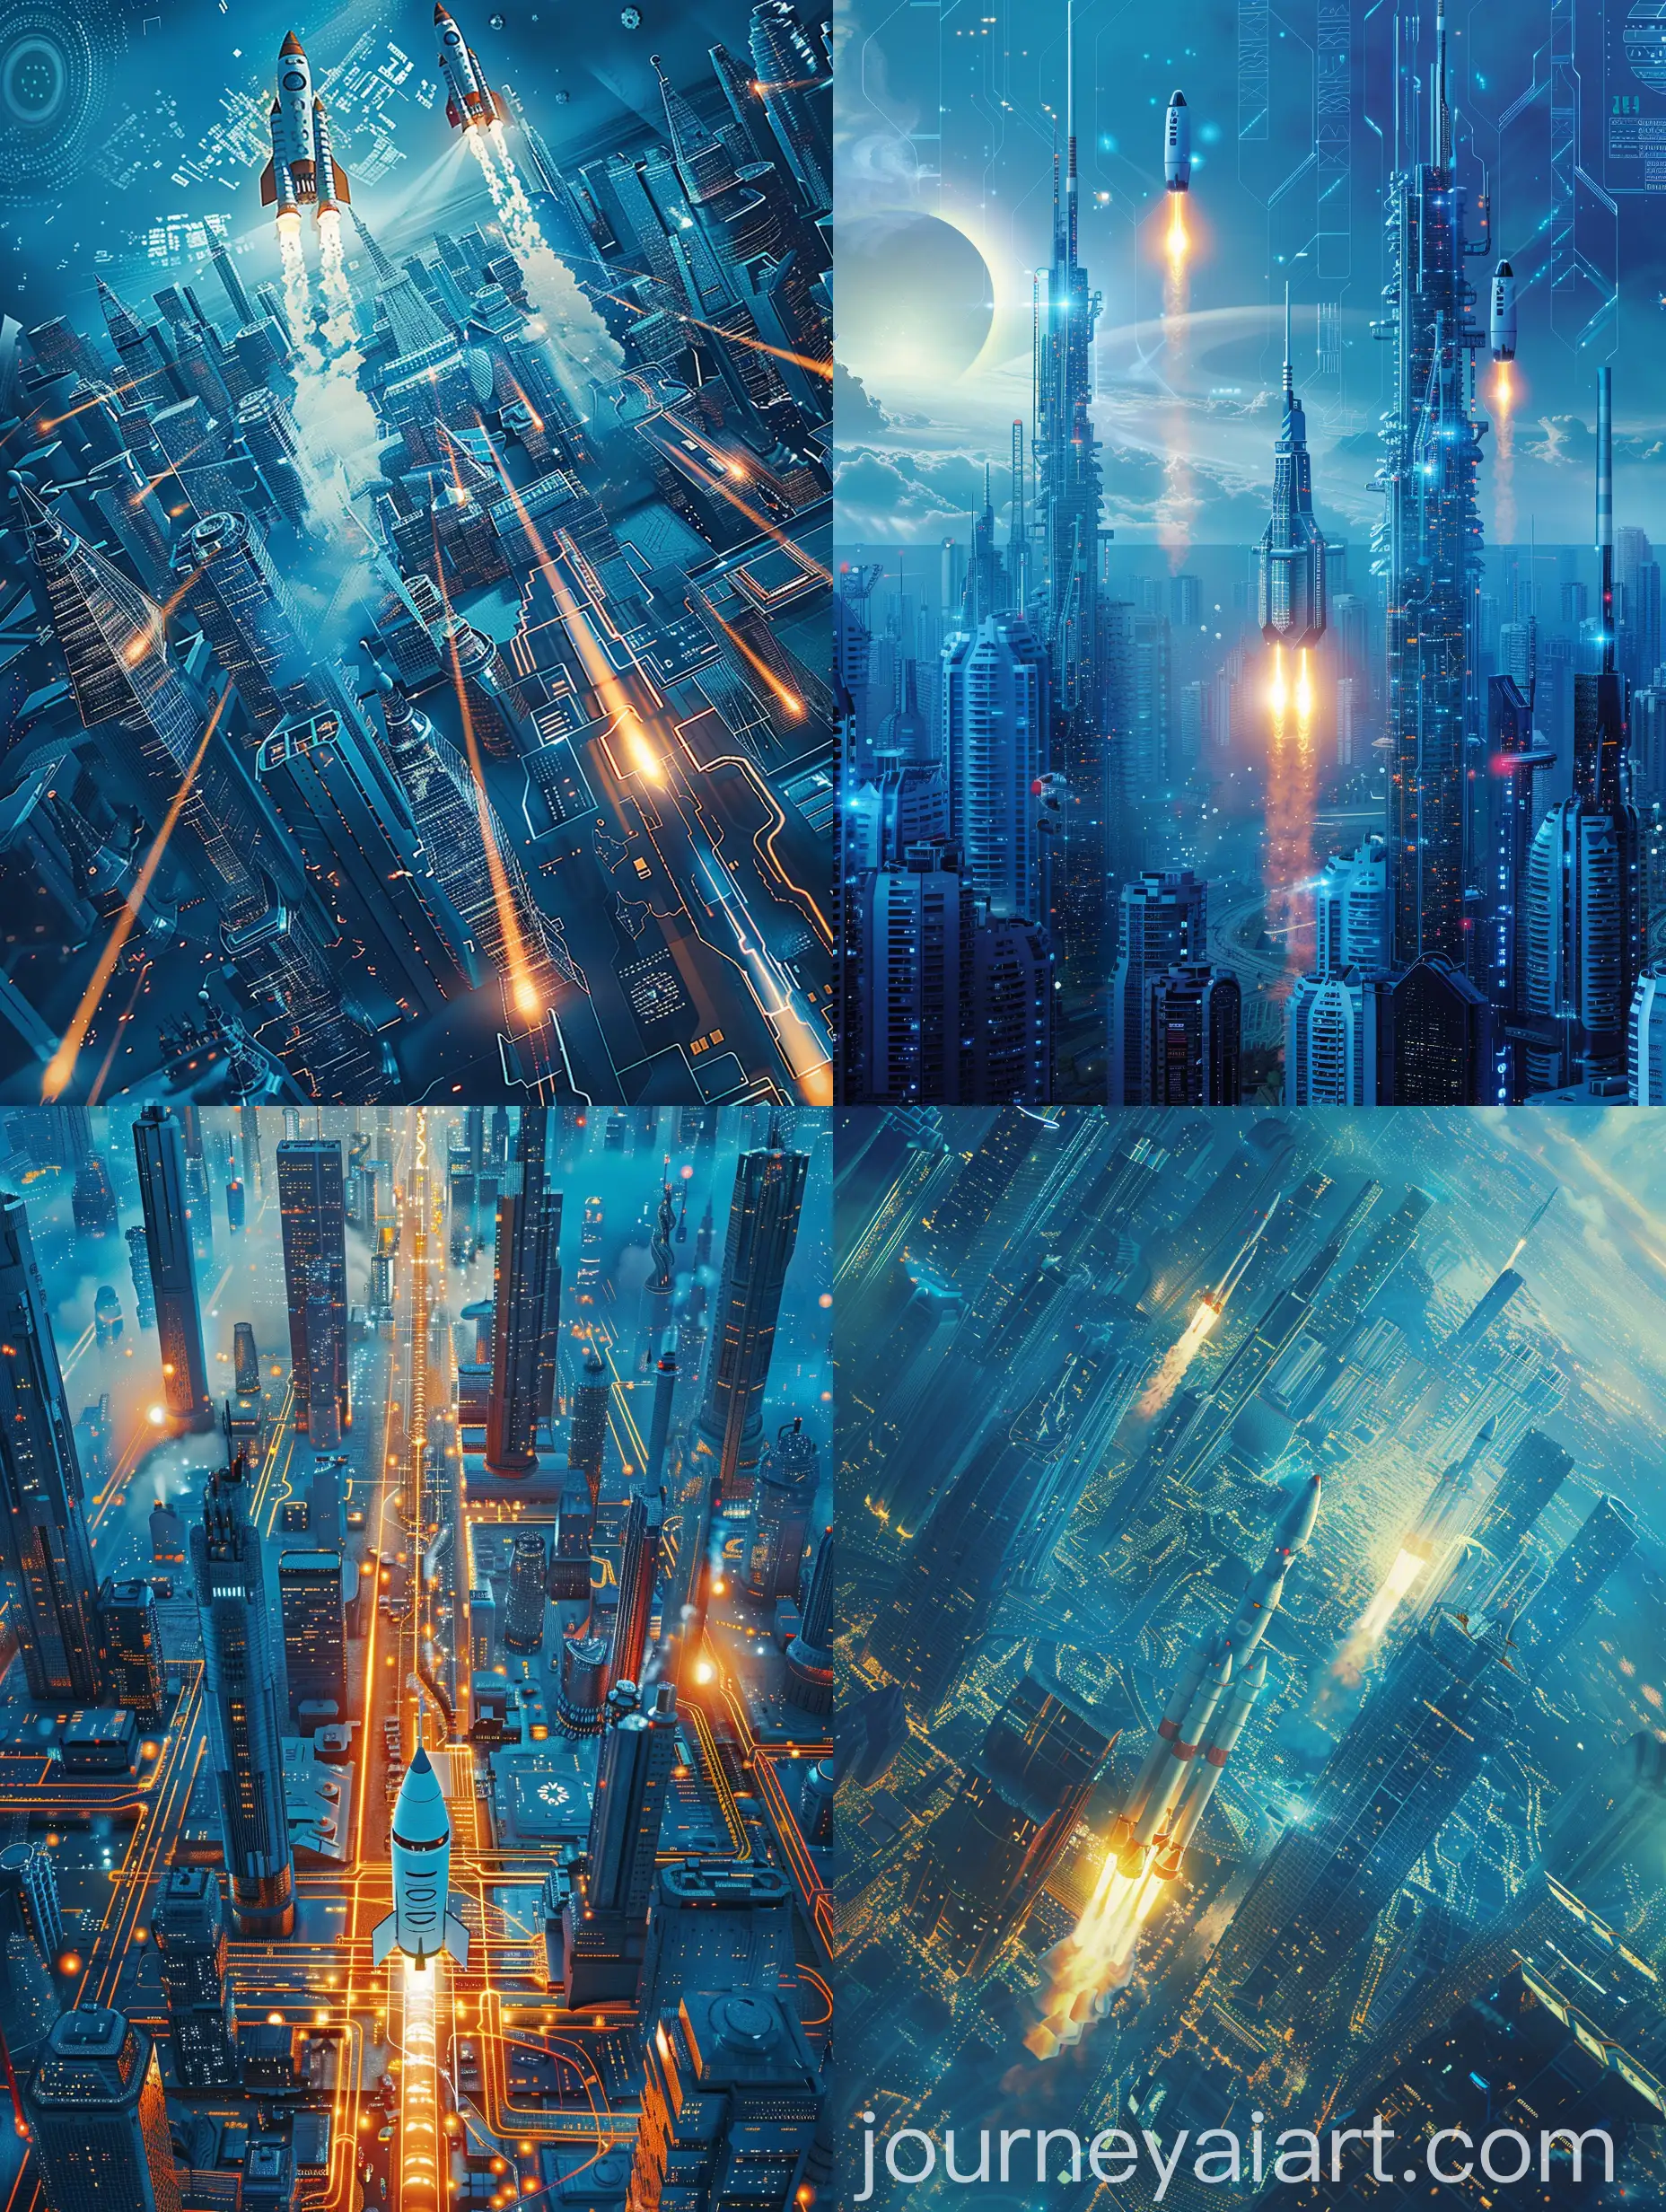 Futuristic-Smart-Cities-and-Virtual-Pipelines-Rocket-Launches-and-Holographic-Skies